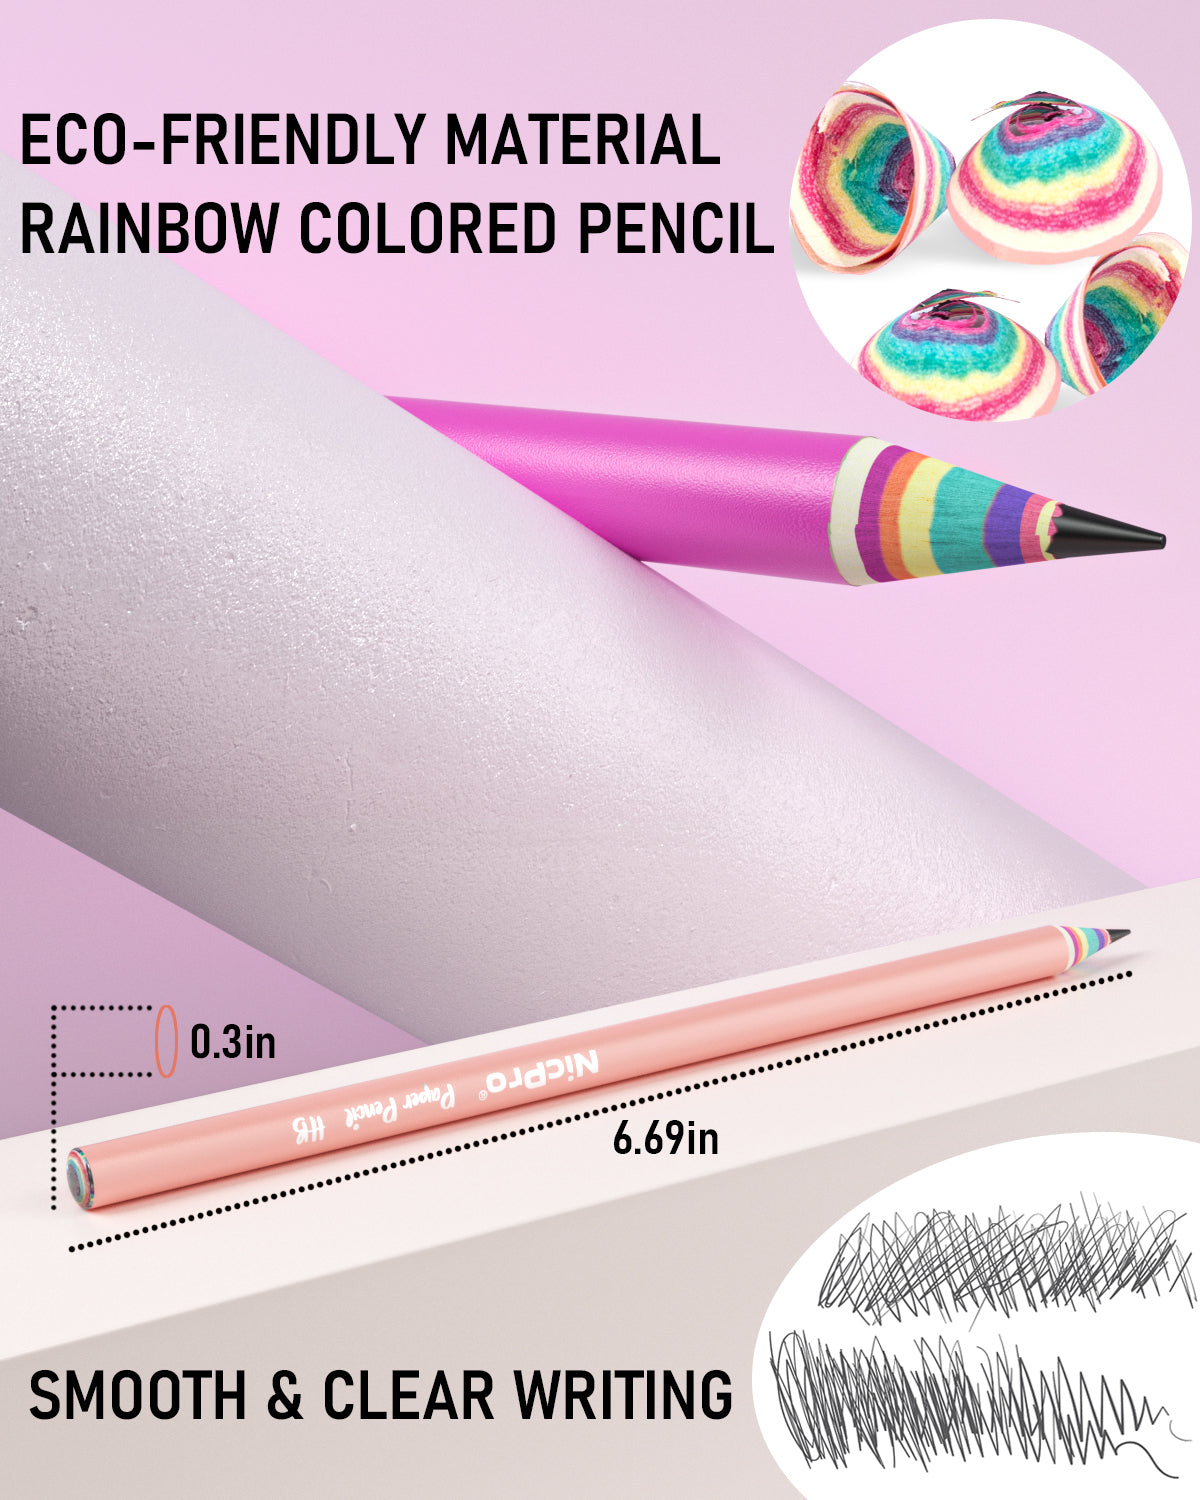 12 Pack Cool Pencils for Kids, Rainbow Pencils #2 HB Pencils for School, Office Eco-Friendly Wood & Plastic, Pre-Sharpened Pencils for Kids (rainbow